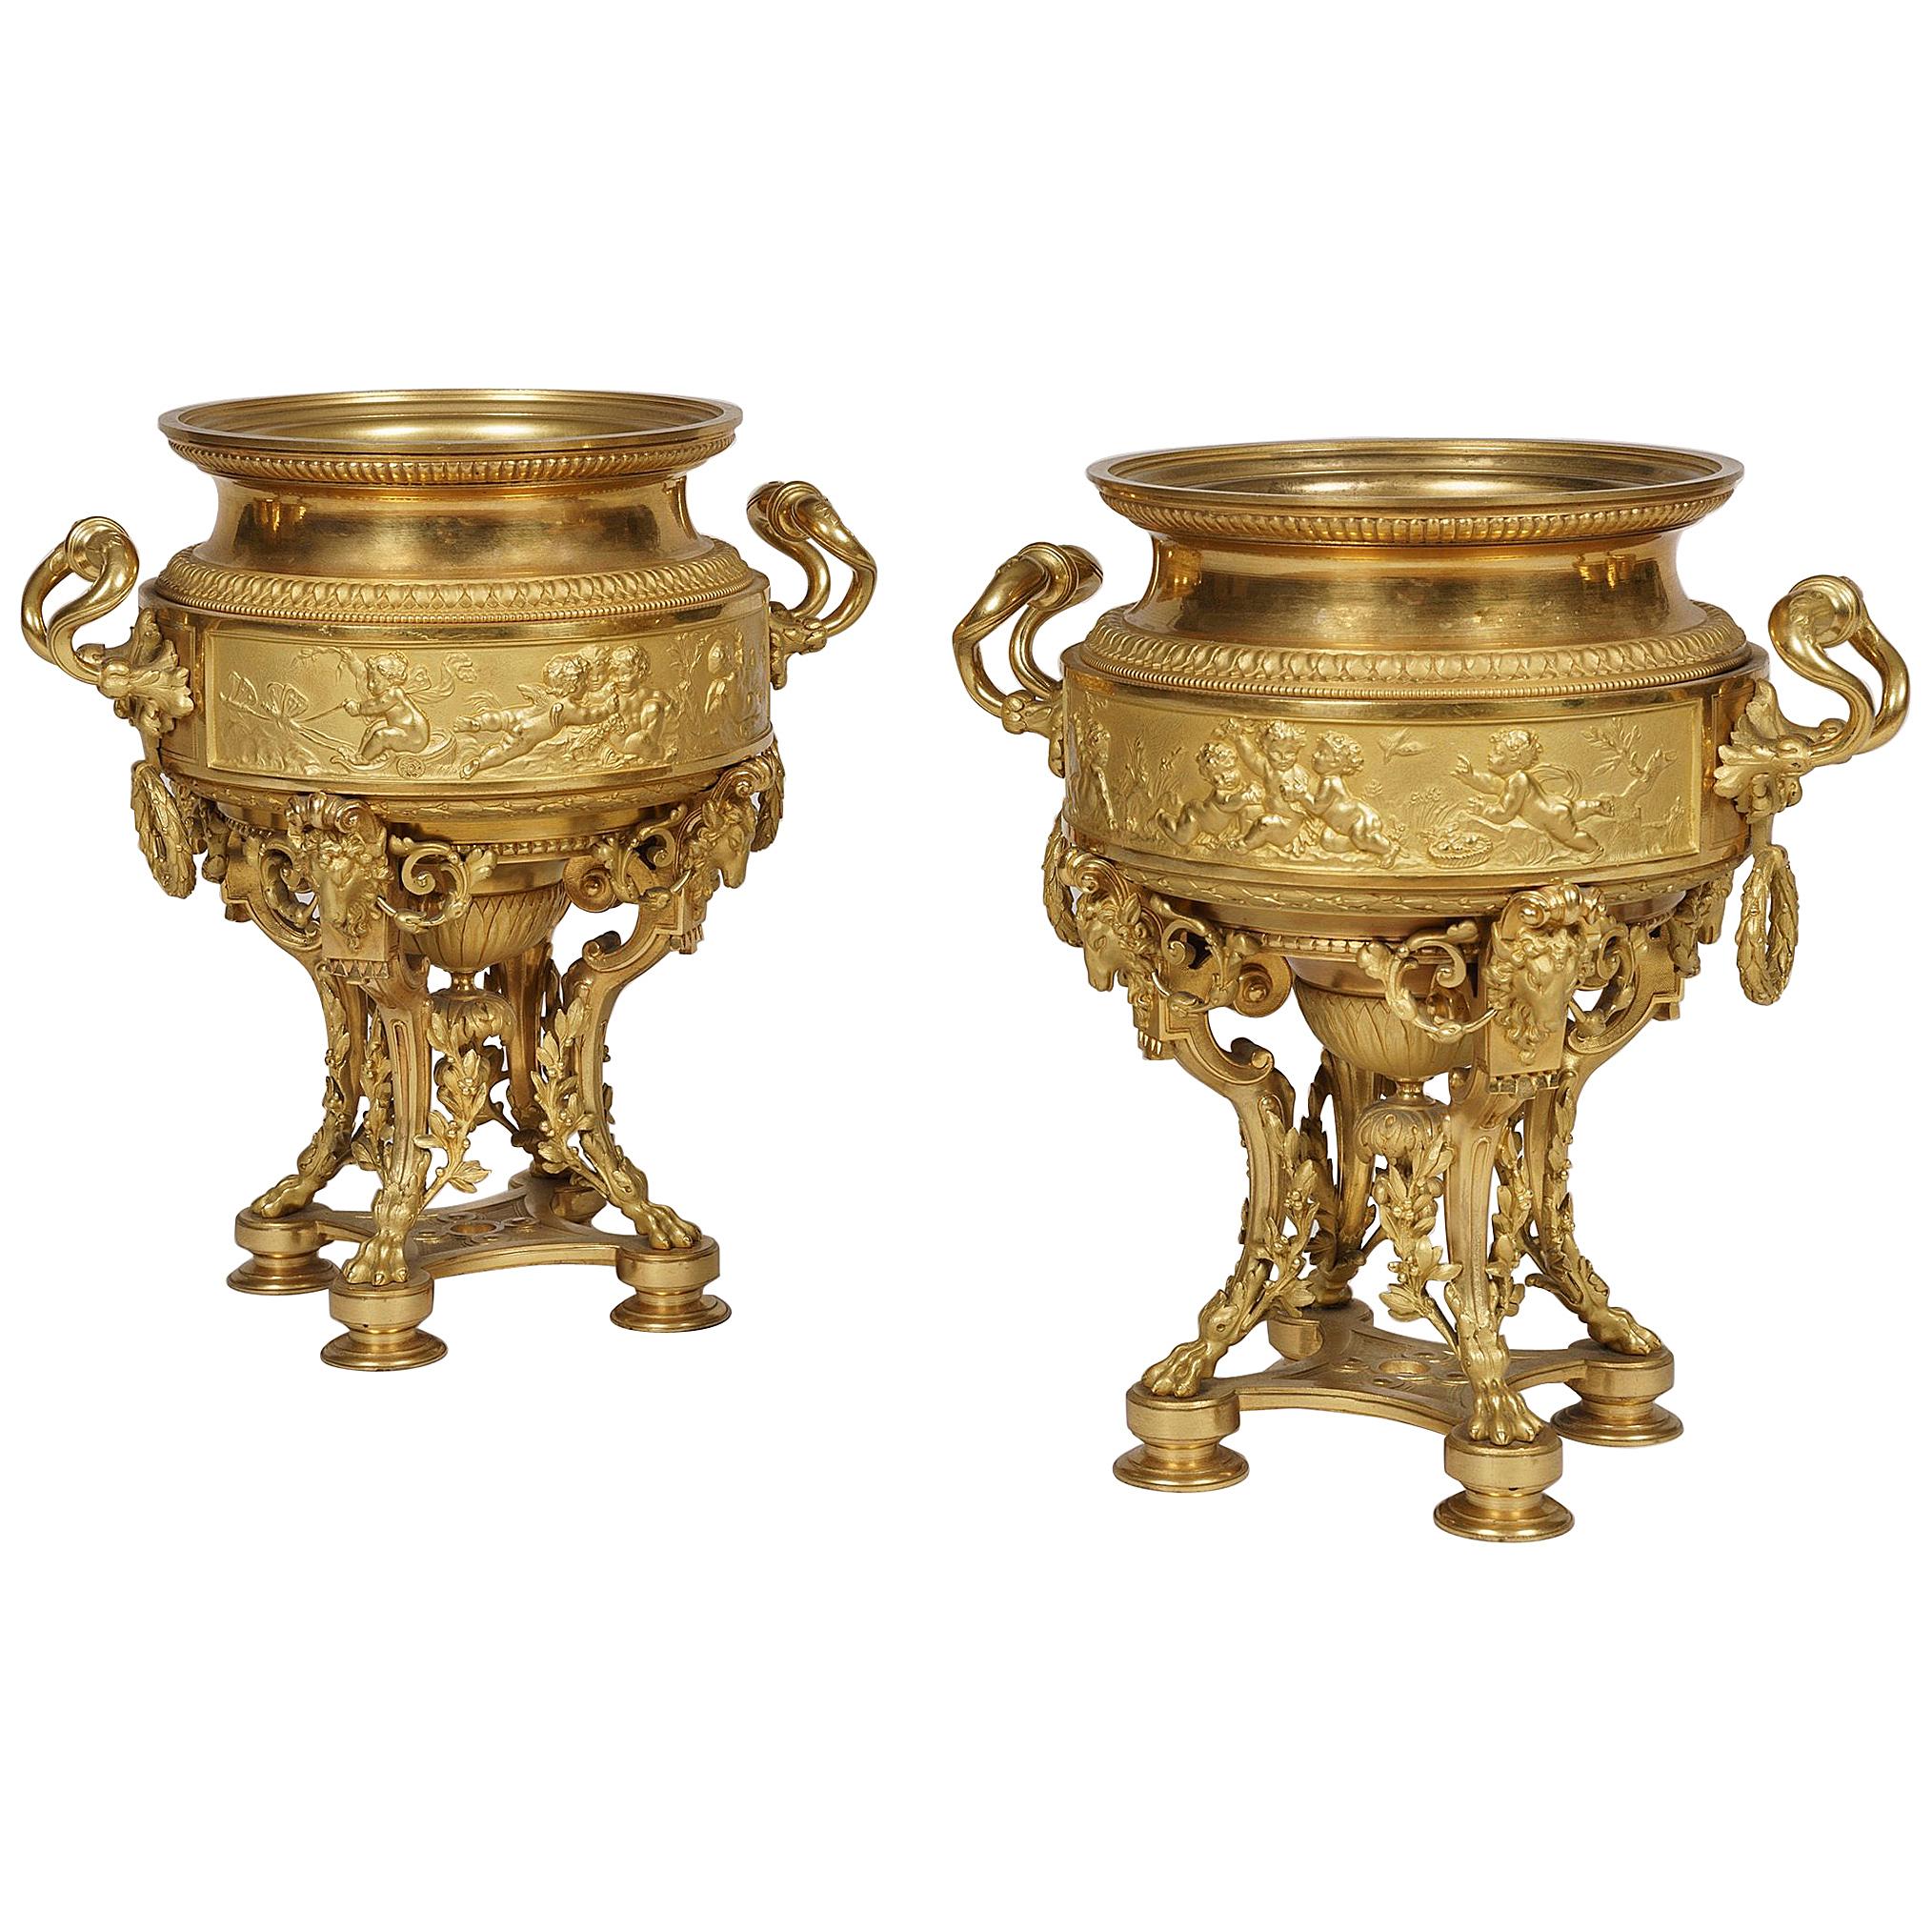 19th Century Pair of Ormolu Vases in the Louis XIV Manner